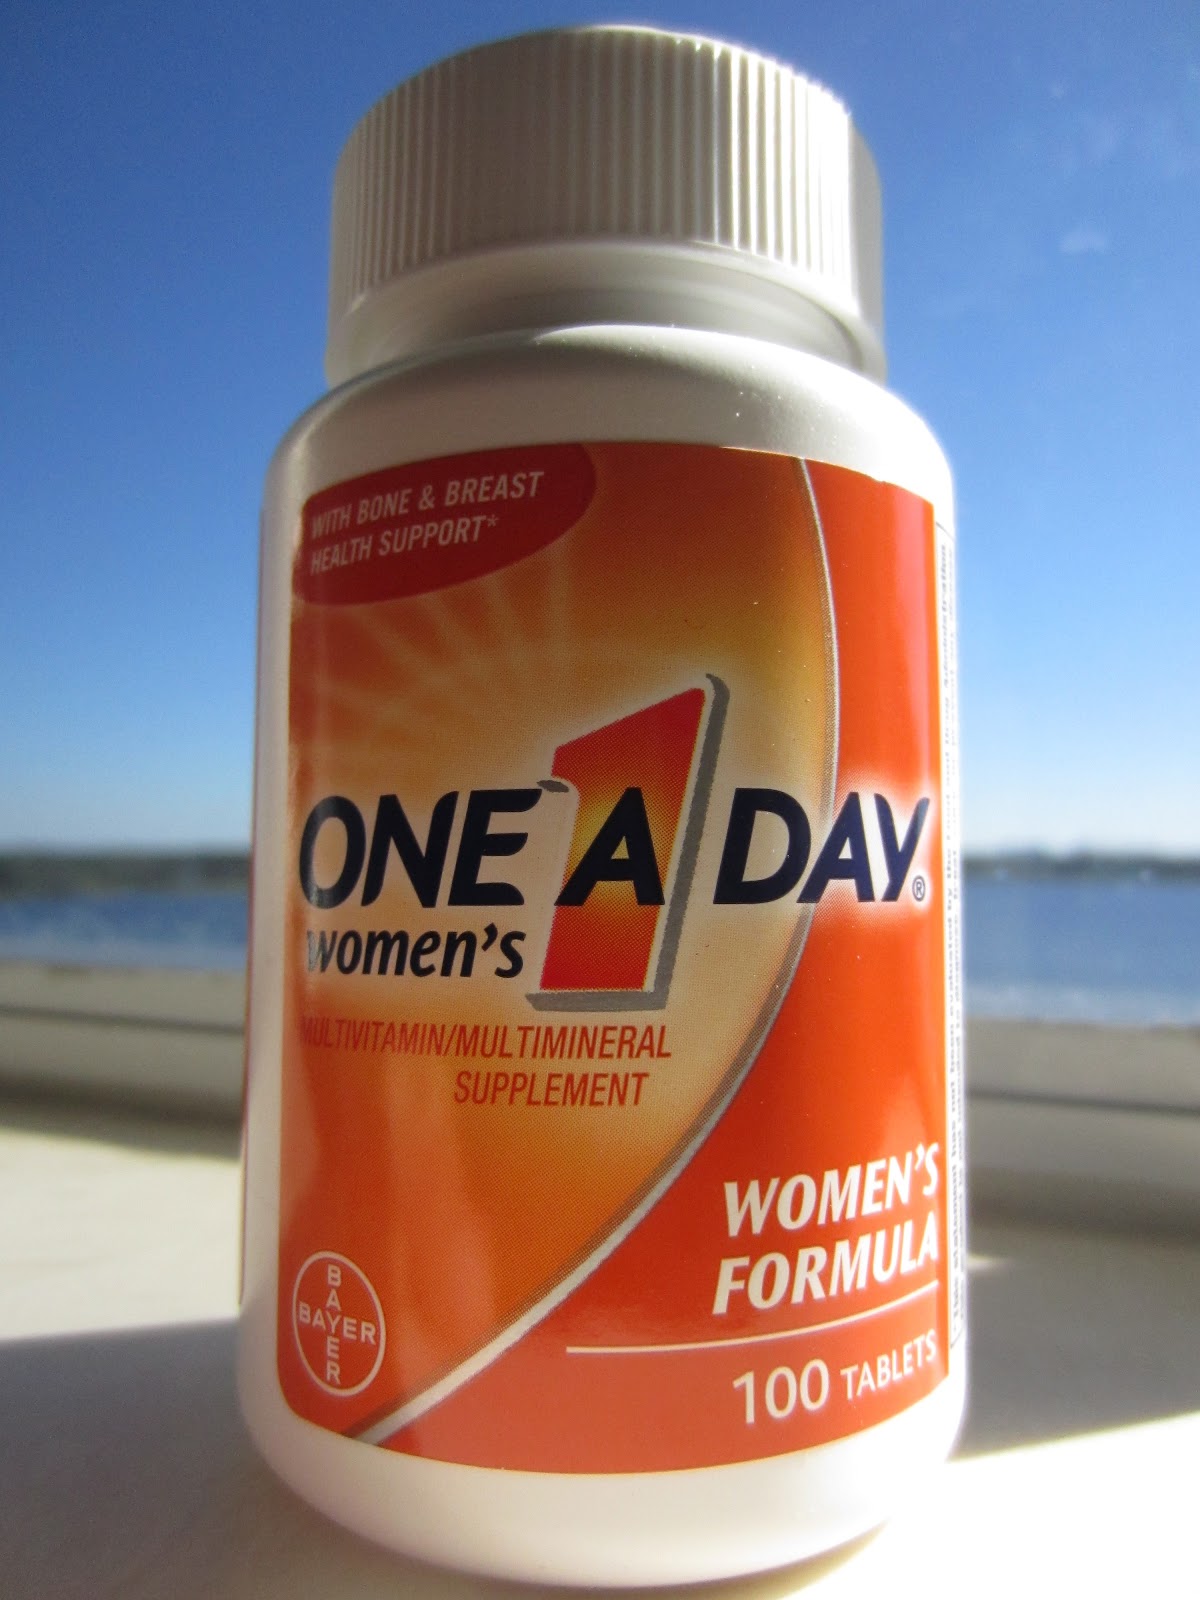 I start every morning (after coffee of course) with a One a Day Women's